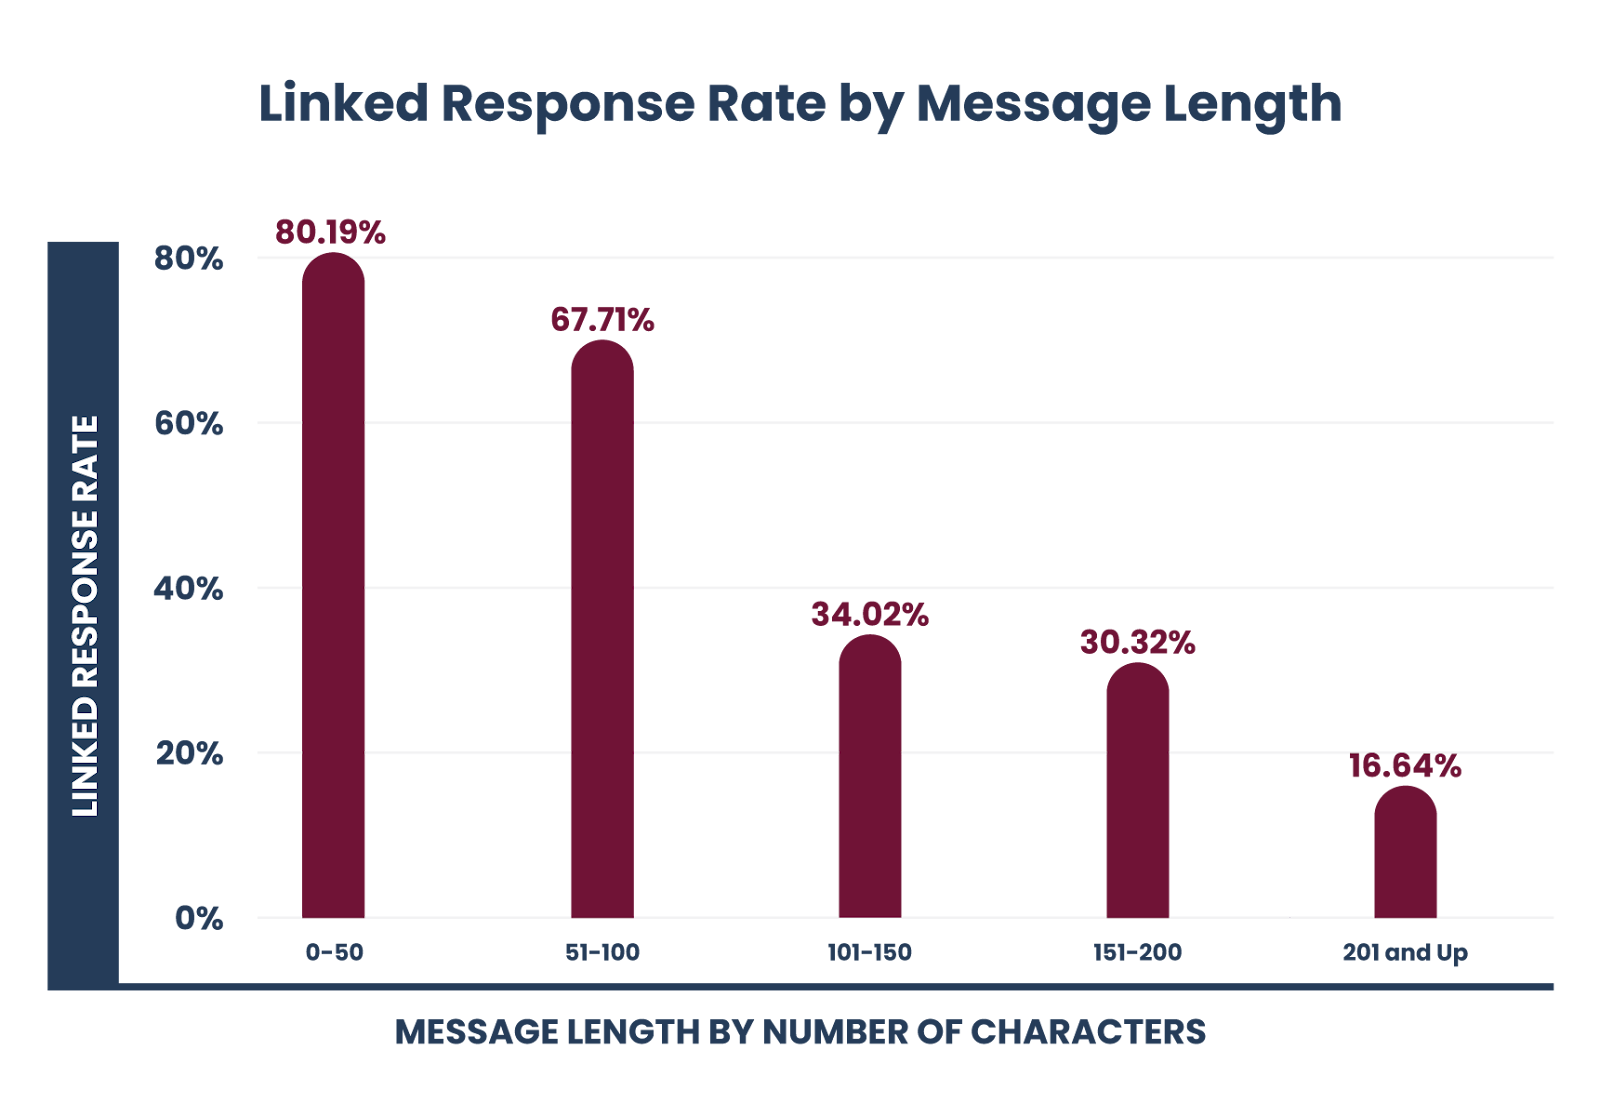 Bar graph showing linked response rate by message rate.